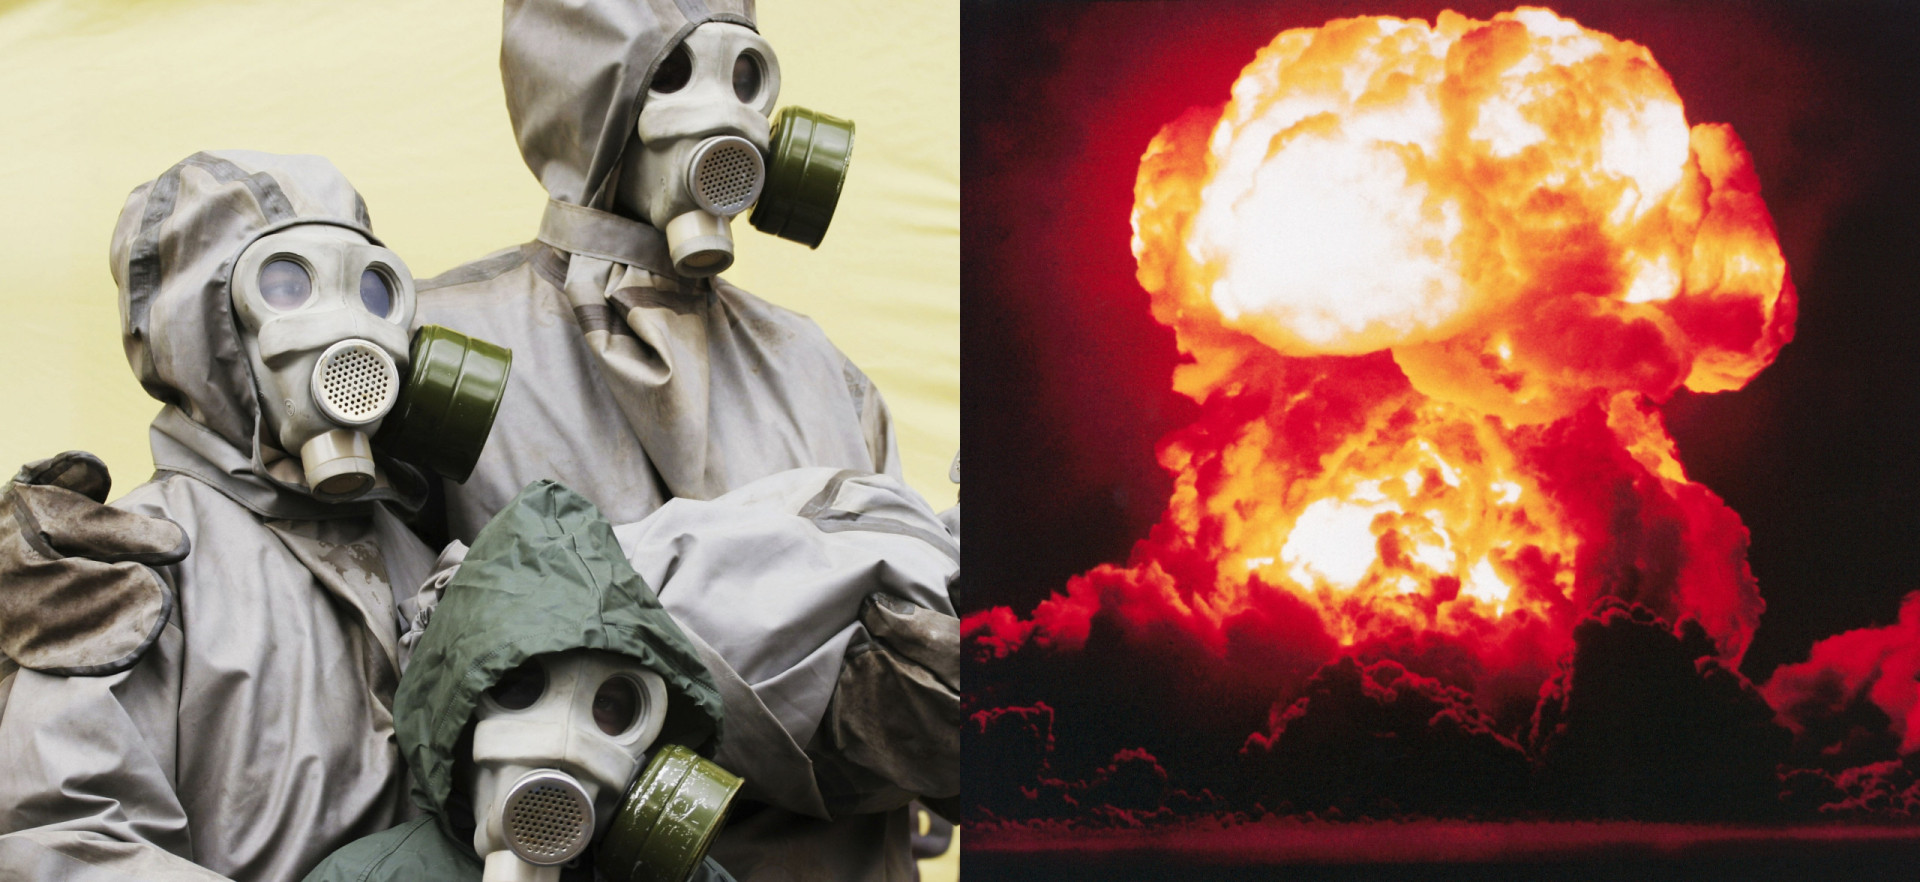 <p>The Doomsday Clock continues to inch closer to the apocalypse over climate change and fears of nuclear war. The year 2024 has brought yet another dire warning issued by the Bulletin of the Atomic Scientists. But what is the Doomsday Clock, and how is it read?</p> <p>To summarize, the clock was developed by scientists in 1947 to track the likelihood of mankind doing something that brings about the end of the world. The development of nuclear weapons and the rapid progression of climate change are two things that have moved the clock's hand closer to midnight, which in this case, marks Armageddon. After the end of the Cold War, the clock was 17 minutes away from midnight, but in recent years, we've gone from counting down the minutes to counting down the seconds. In 2024, the Bulletin left the clock at the same position as last year—90 seconds to midnight.</p> <p>"Conflict hot spots around the world carry the threat of nuclear escalation, climate change is already causing death and destruction, and disruptive technologies like AI and biological research advance faster than their safeguards," Rachel Bronson, the Bulletin's president and CEO, told Reuters. She clarified that leaving the clock unchanged is "not an indication that the world is stable," considering how disastrously close we already are to midnight. </p> <p>Click through the gallery to learn more about the Doomsday Clock and how we've come so close to the end of the world. </p><p>You may also like:<a href="https://www.starsinsider.com/n/187642?utm_source=msn.com&utm_medium=display&utm_campaign=referral_description&utm_content=490923v3en-ca"> The craziest daredevils to go over the Niagara Falls</a></p>